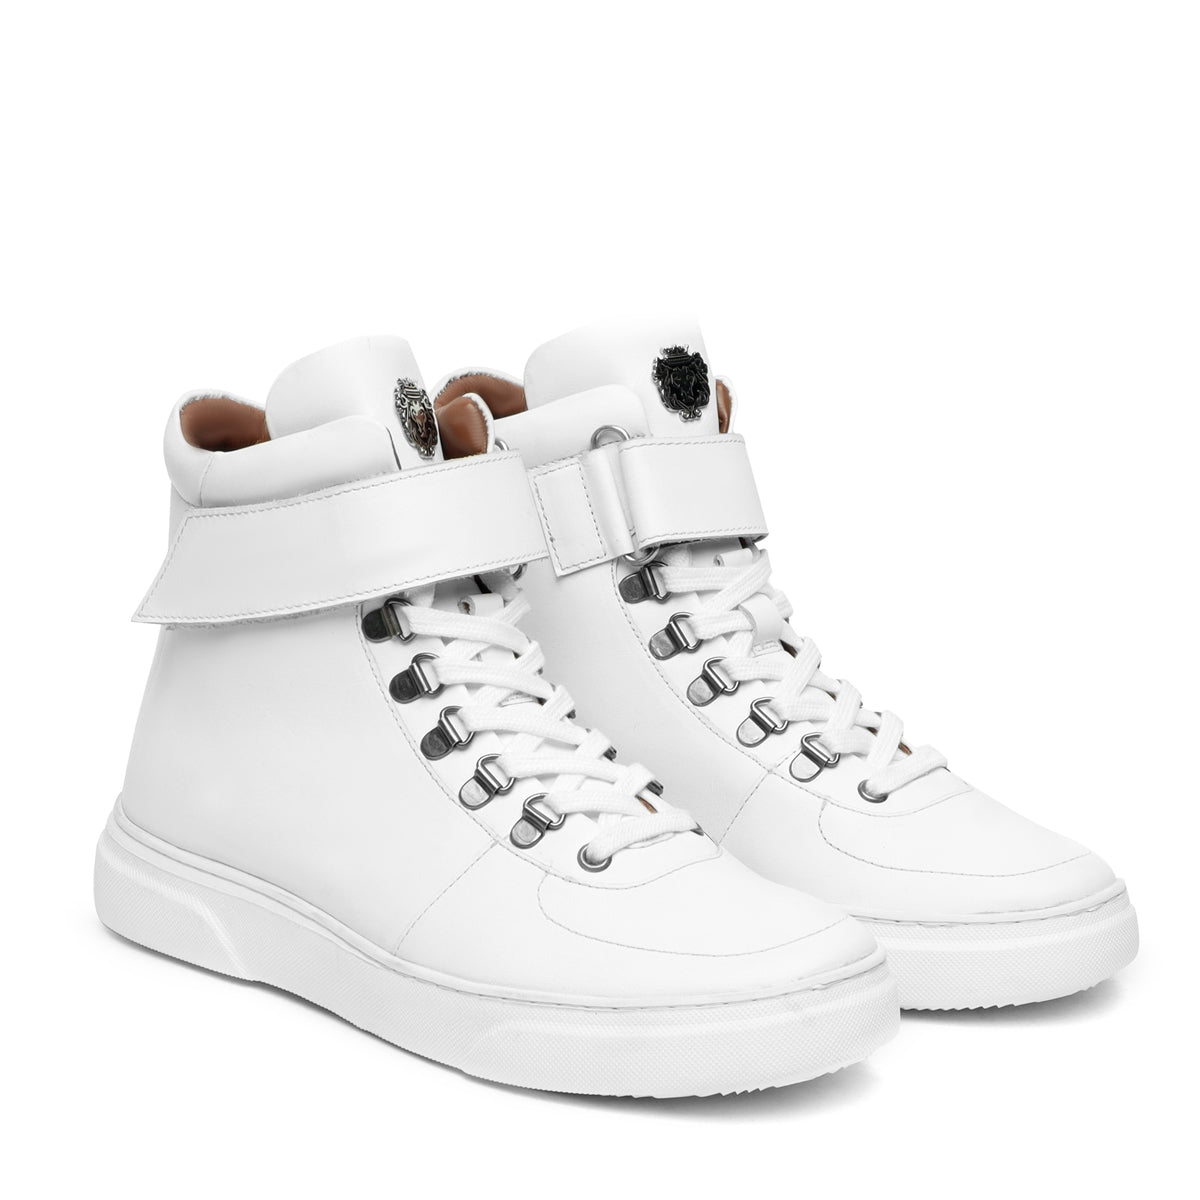 White Leather Lace Ups with Adjustable Leather Strap Mid-Top Sneakers by Brune & Bareskin